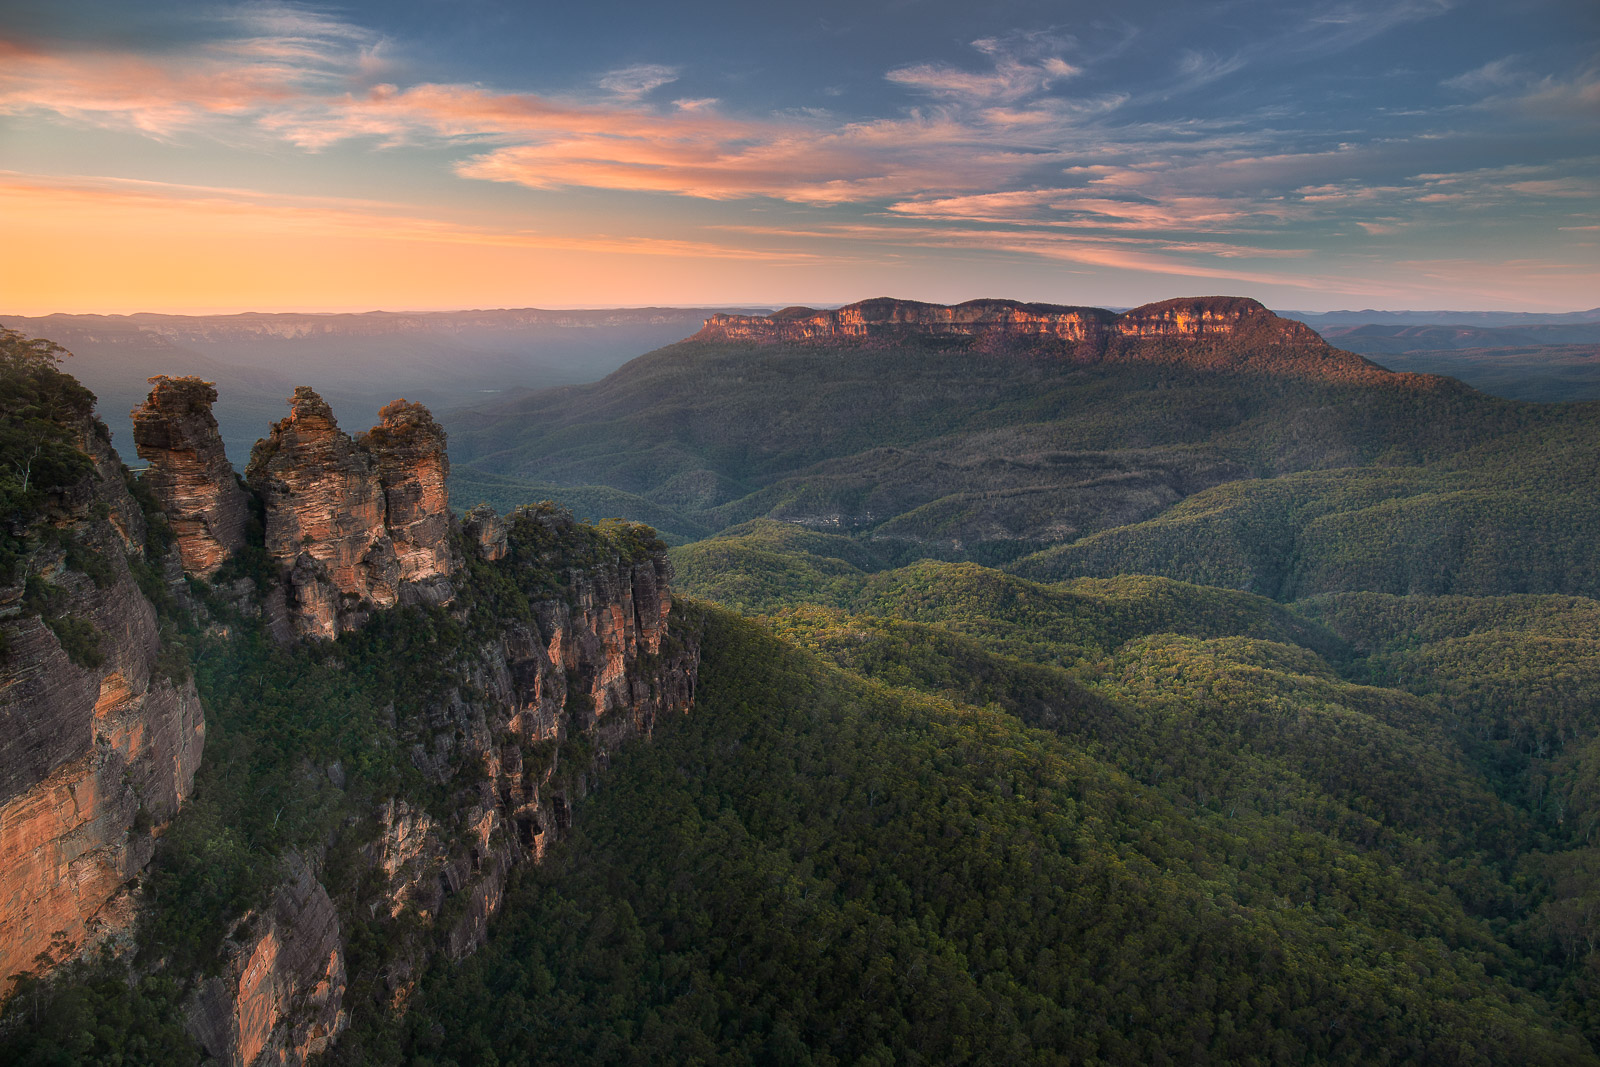 Blue Mountains National Park near Sydney is home to the native flora and fauna, the iconic three sandstone rock formations and it’s also a sacred Aboriginal site.